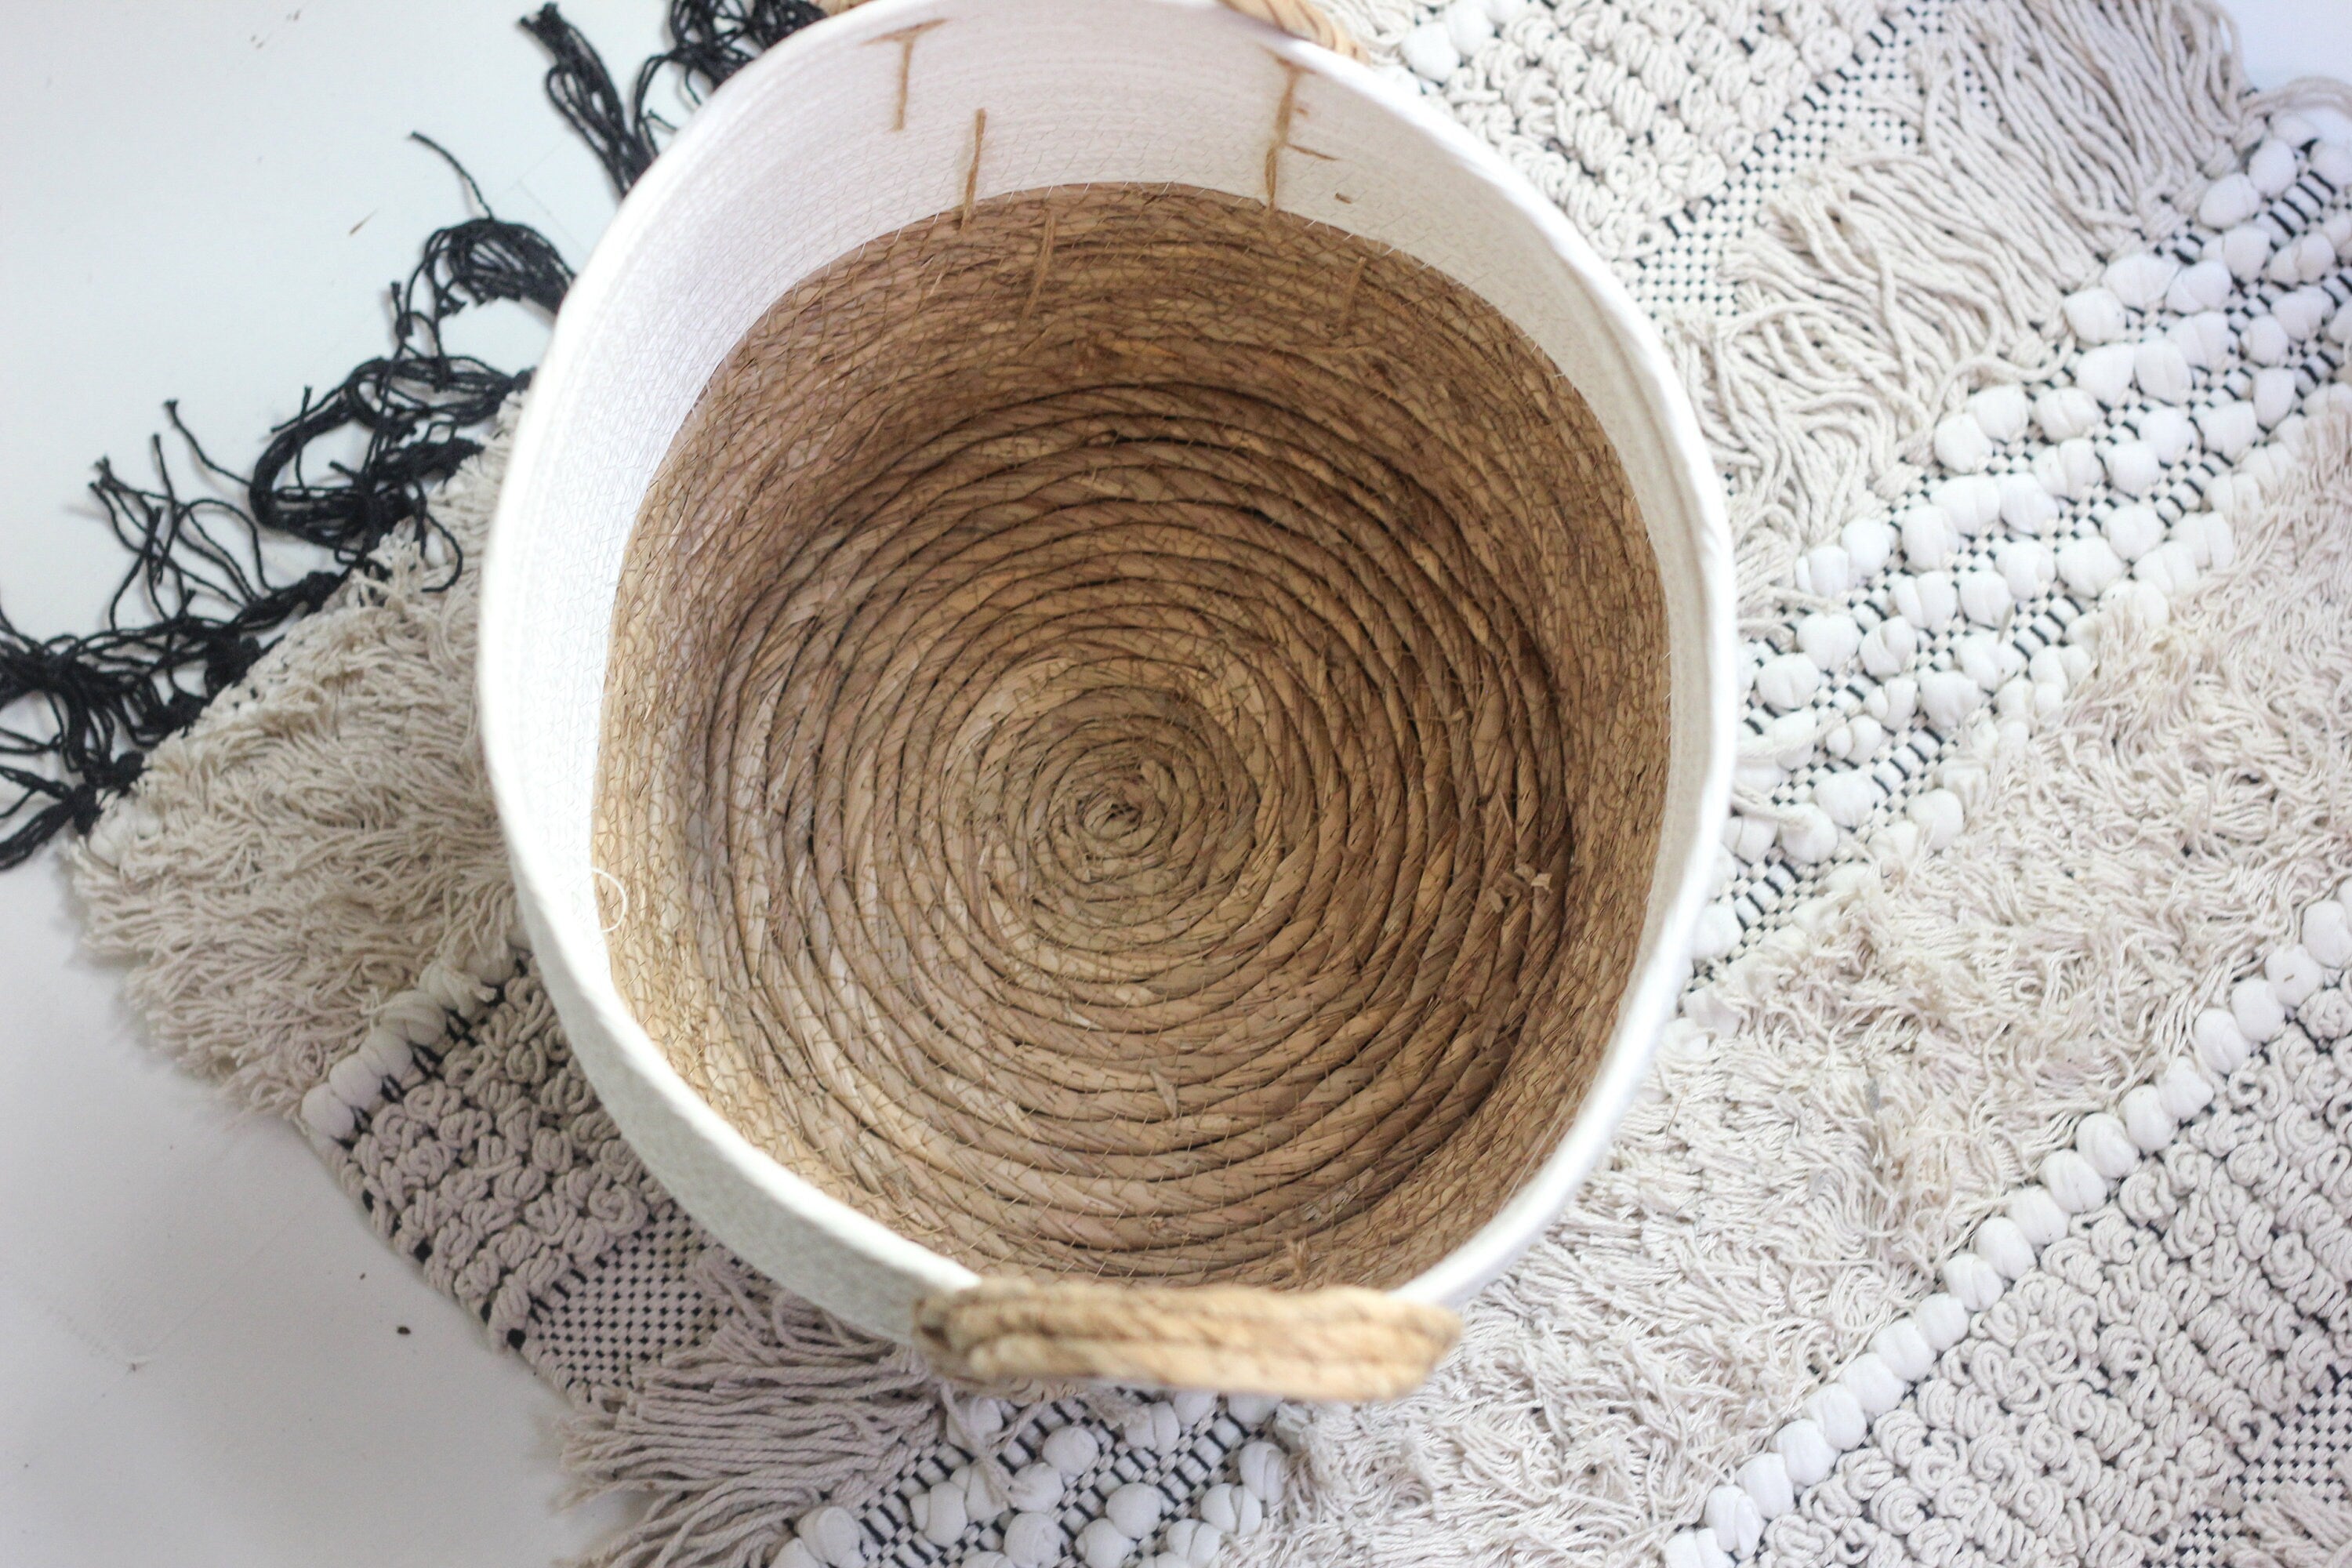 Straw and Cotton Woven Large Round Floor Plant Basket